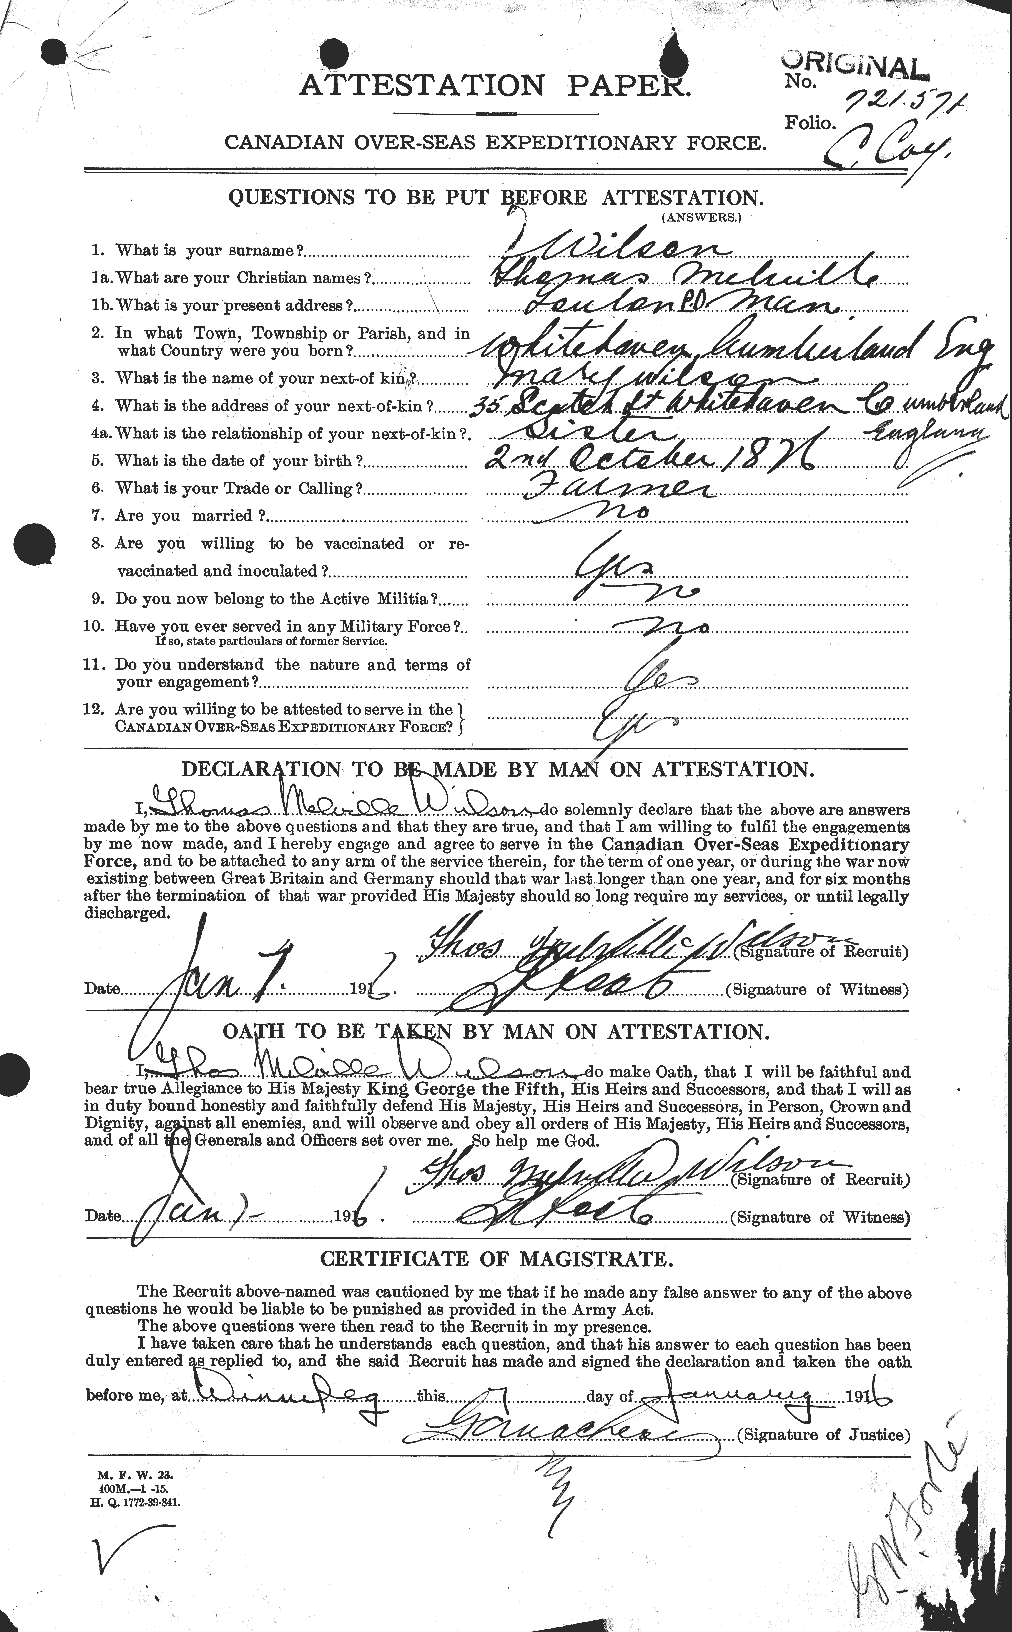 Personnel Records of the First World War - CEF 681288a